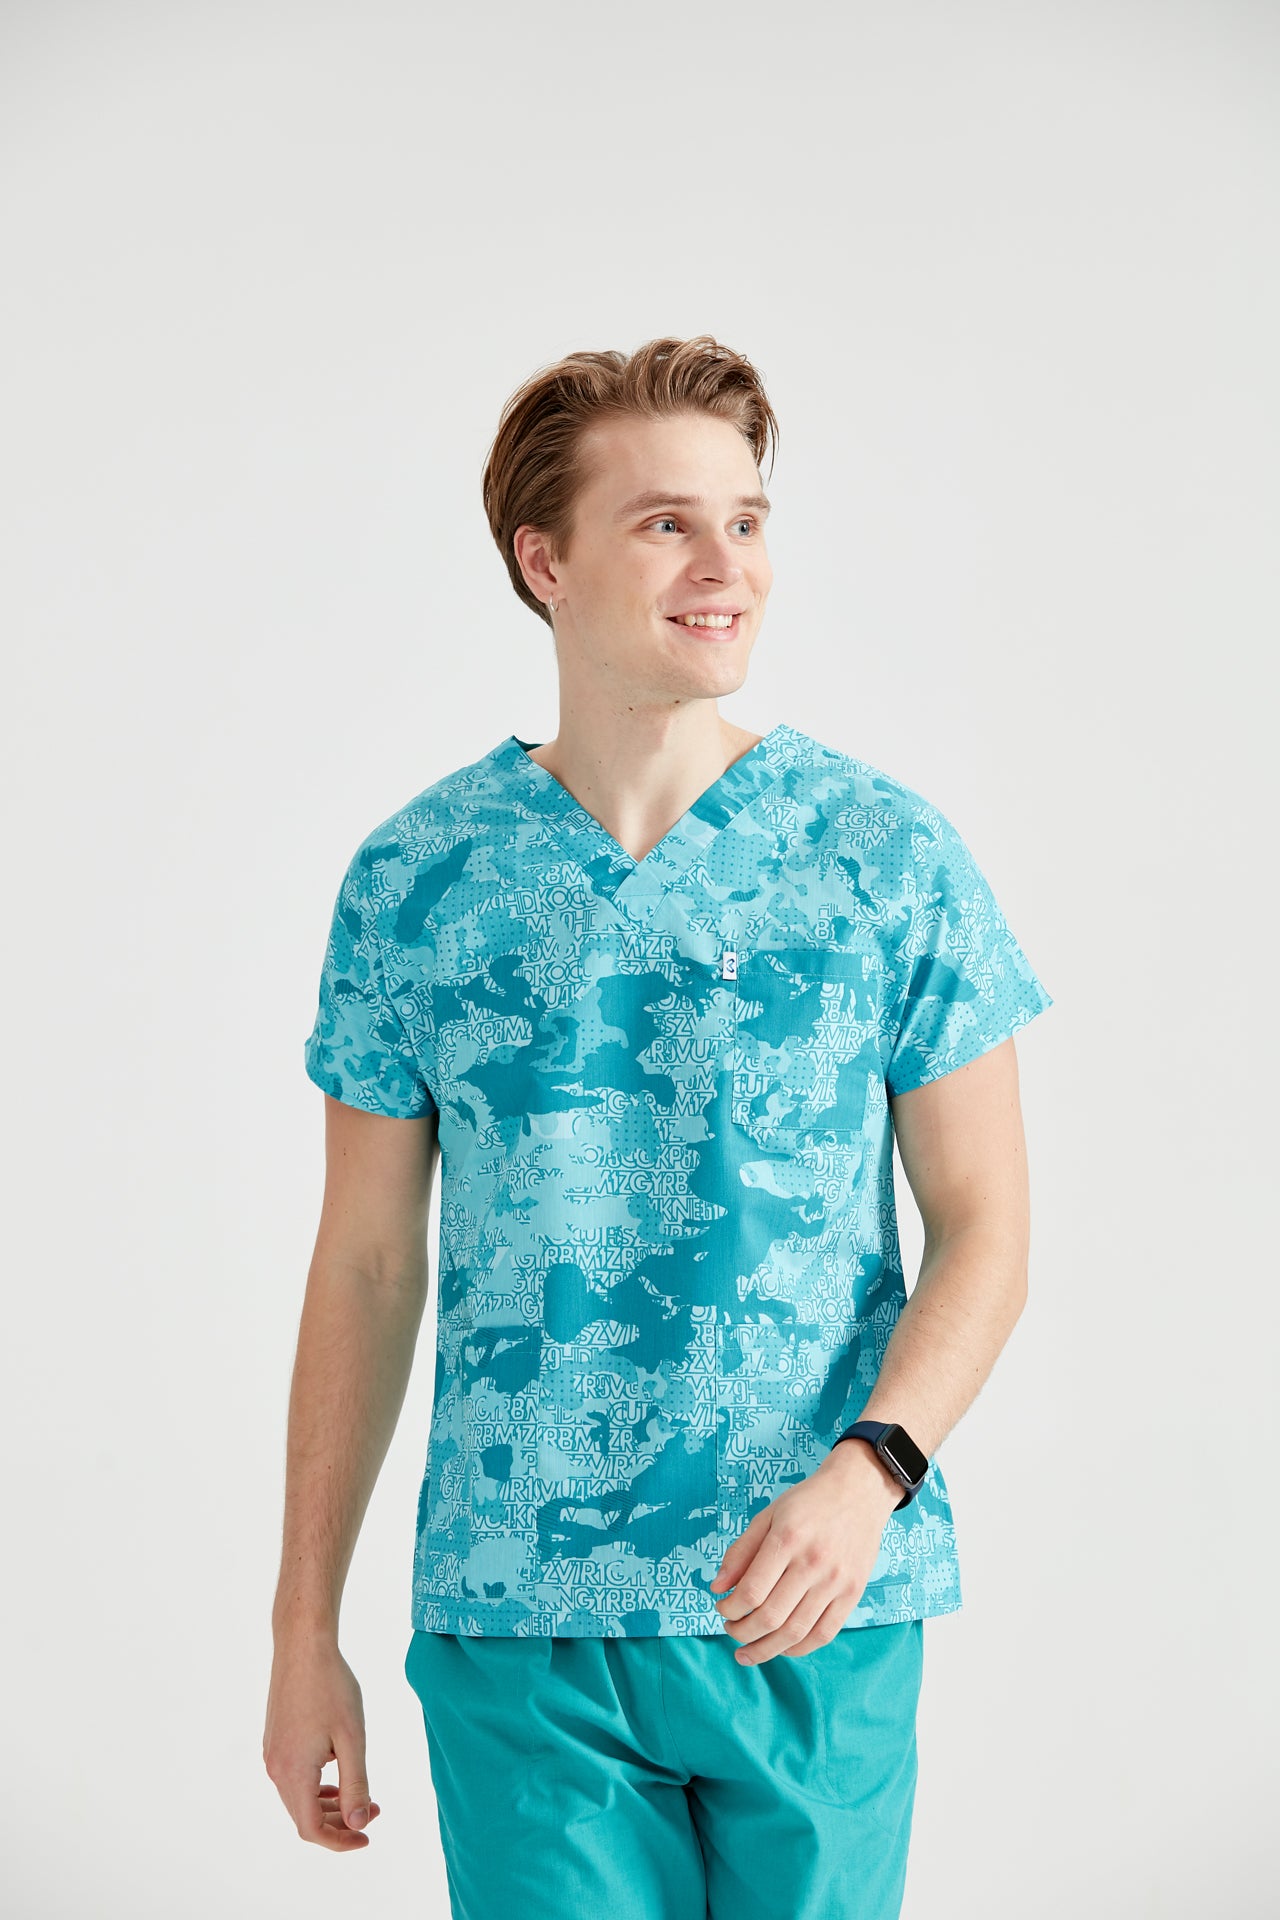 Asistent medical imbracat in bluza Turquoise Camouflage, vedere din fata